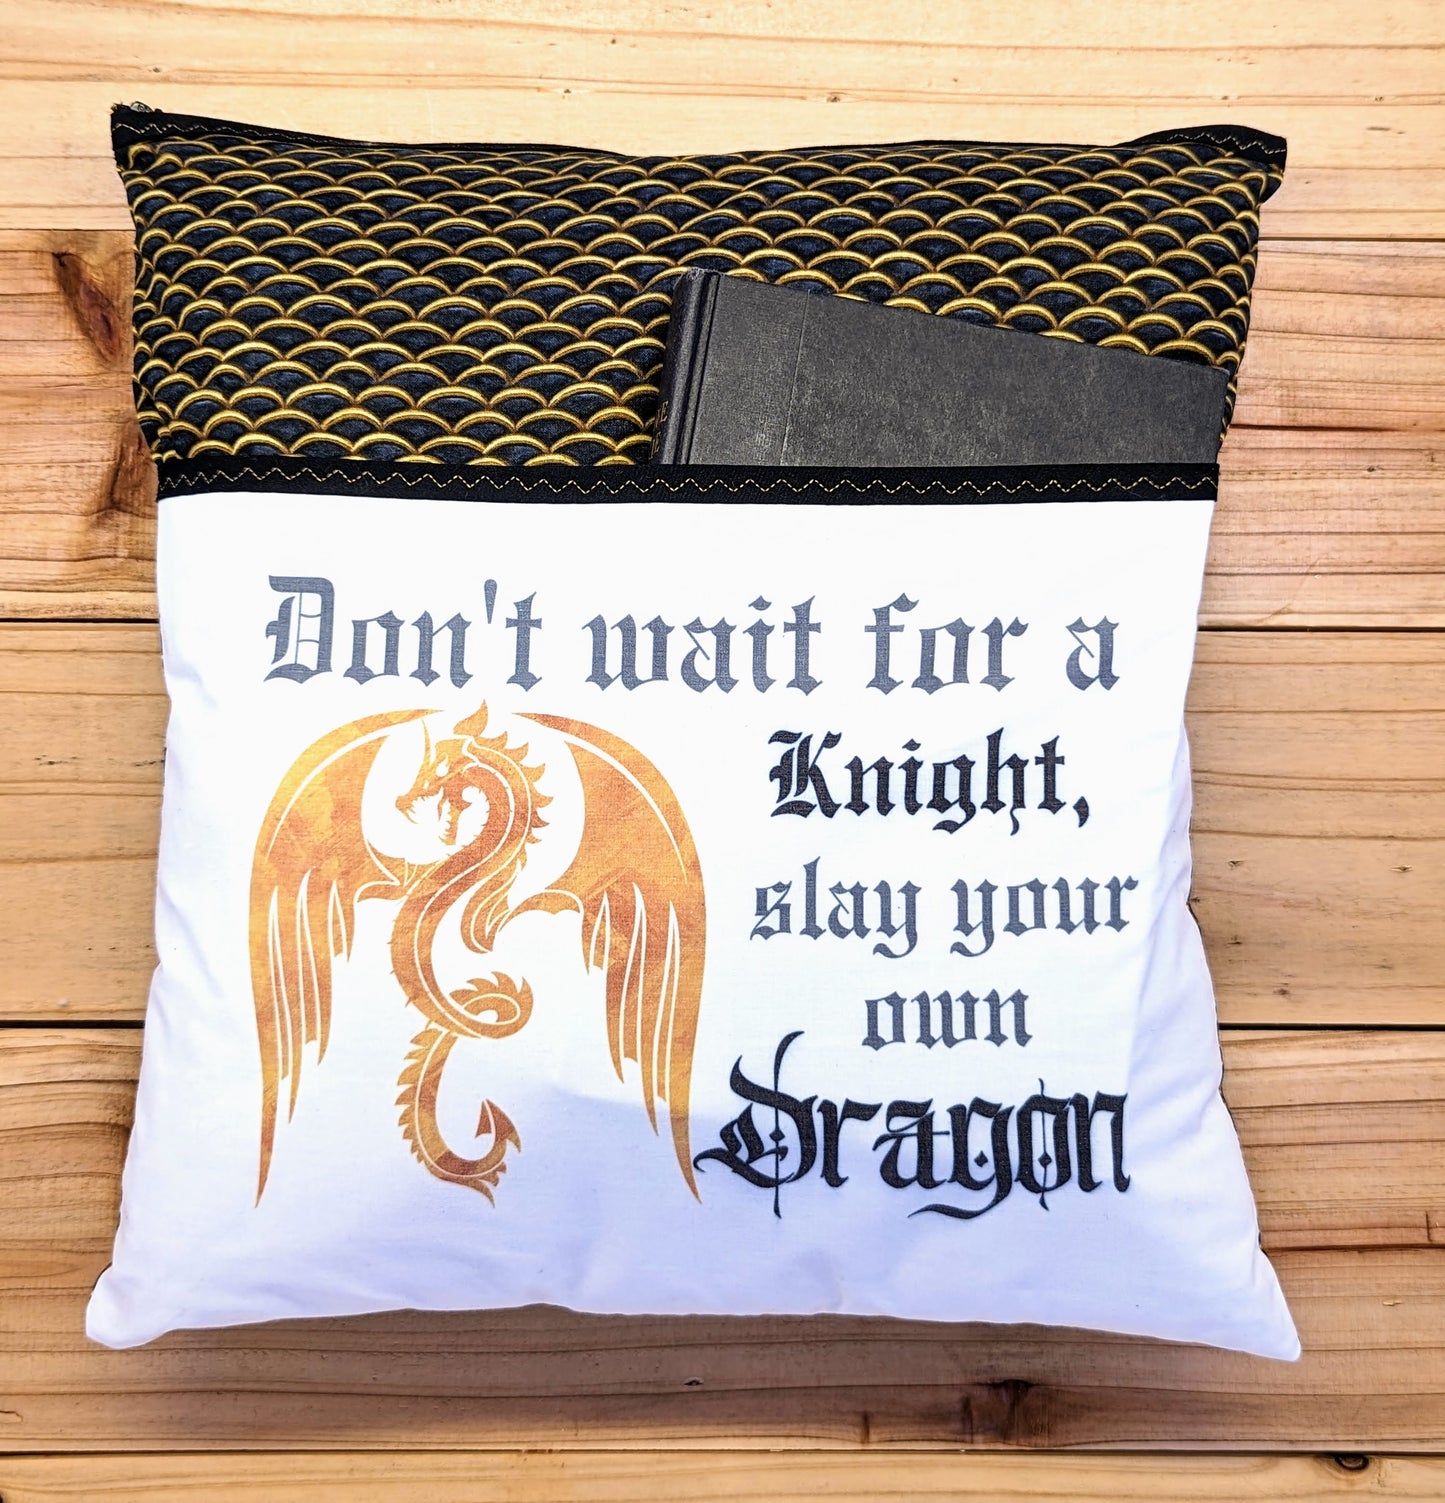 Dont Wait For A Knight Slay Your Own Dragon Book Pillow With Pocket